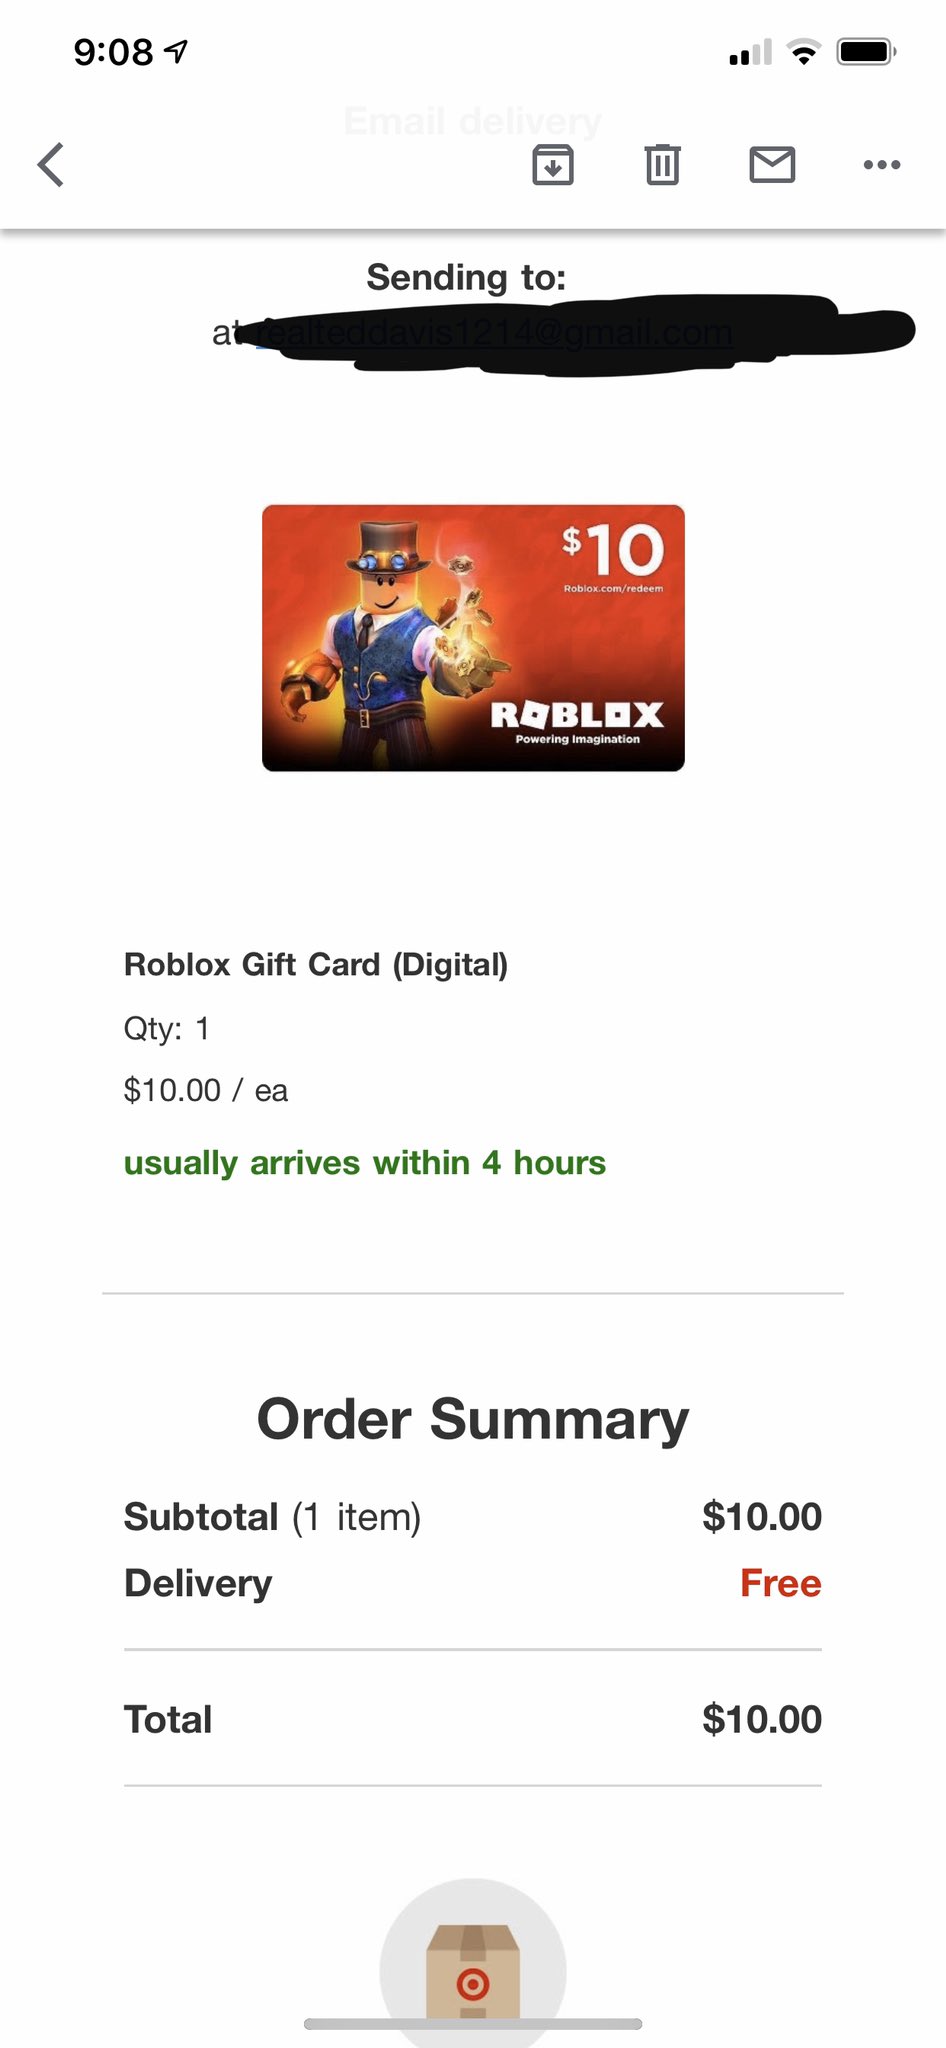 Ted On Twitter Doing A 10 Roblox Gift Card Giveaway I Ll Giveaway A Free 10 Roblox Gift Card To One Person How To Enter 1 Retweet This Post 2 Follow Me - robux 10 dollar gift card